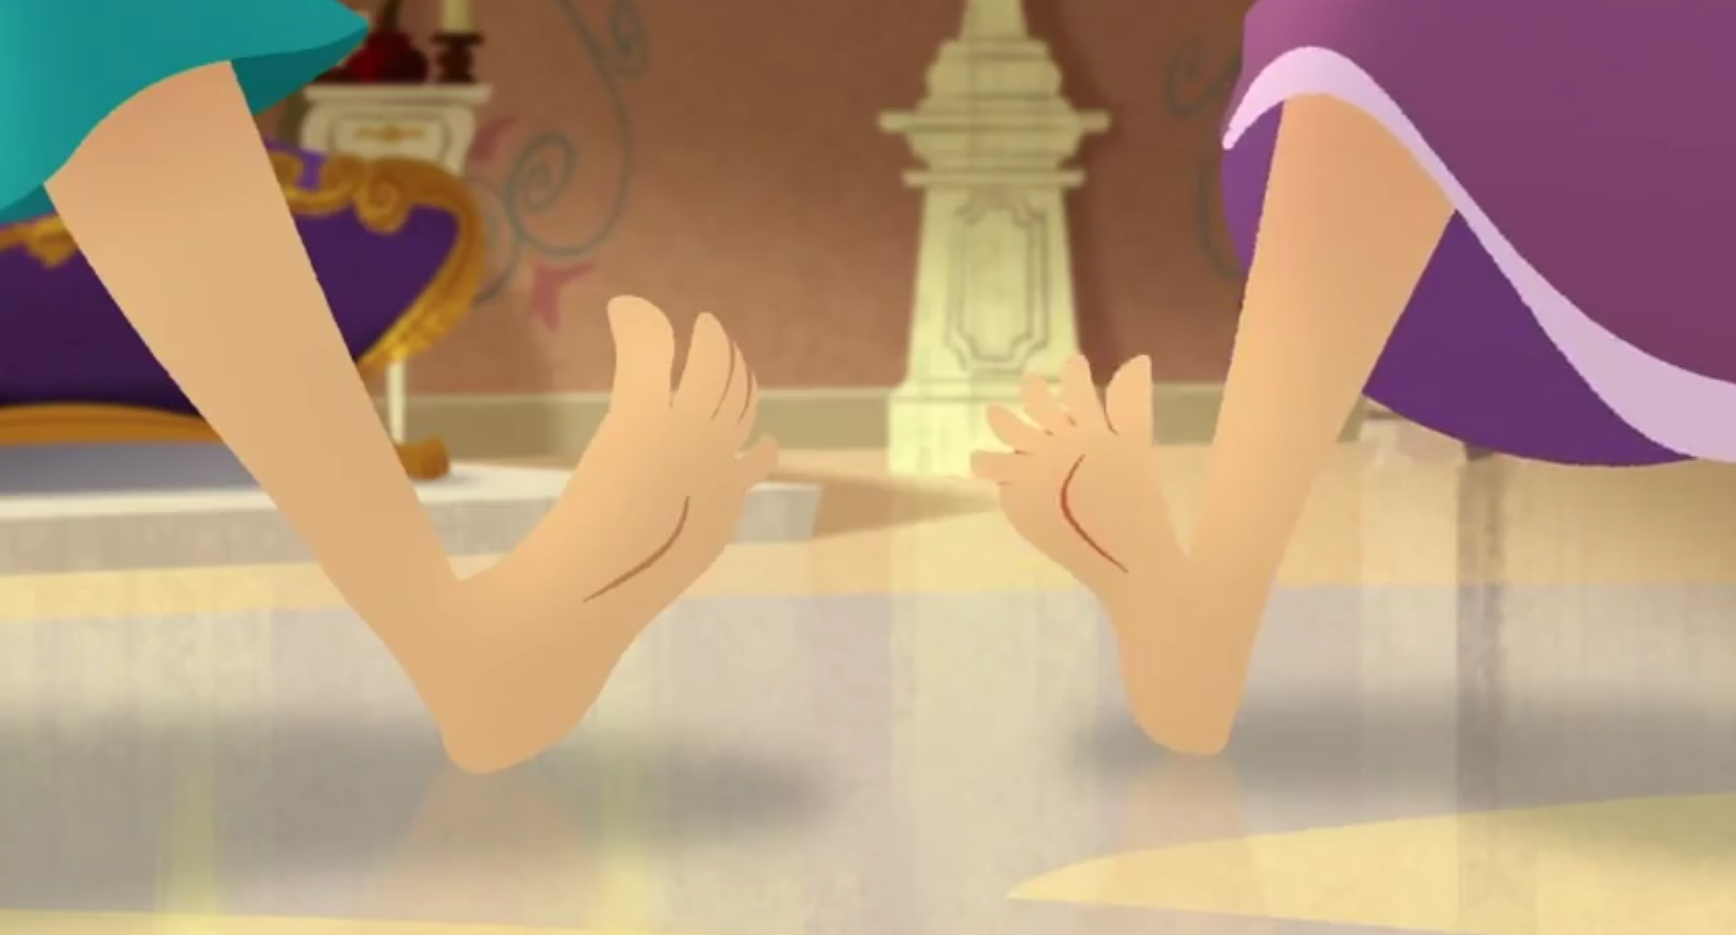 Image Rapunzel And Willow Feet Gesturespng Disney Wiki Fandom Powered By Wikia 8881